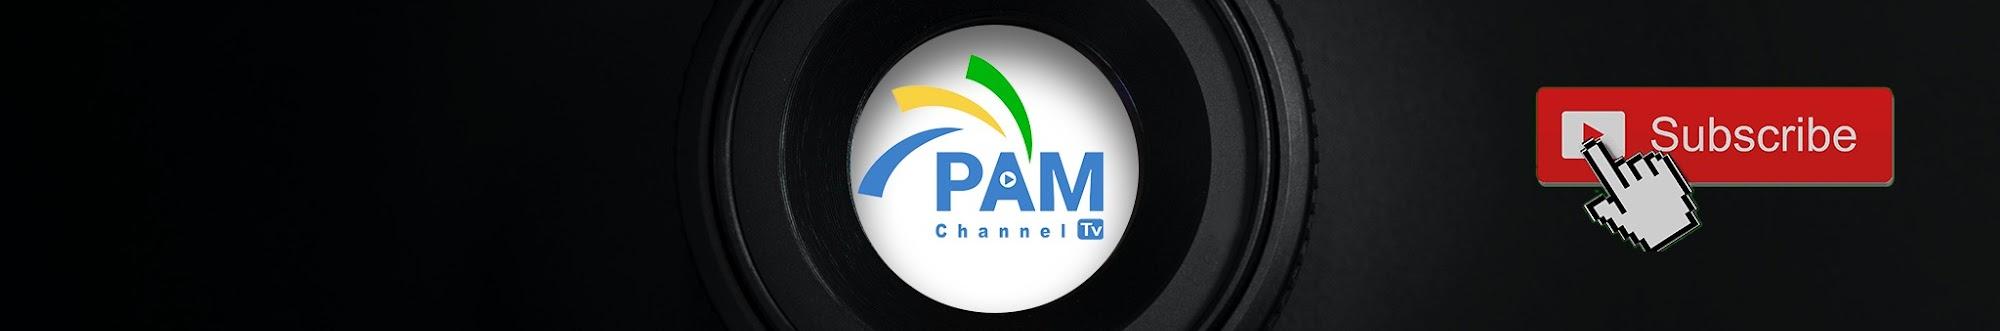 PAM Channel TV